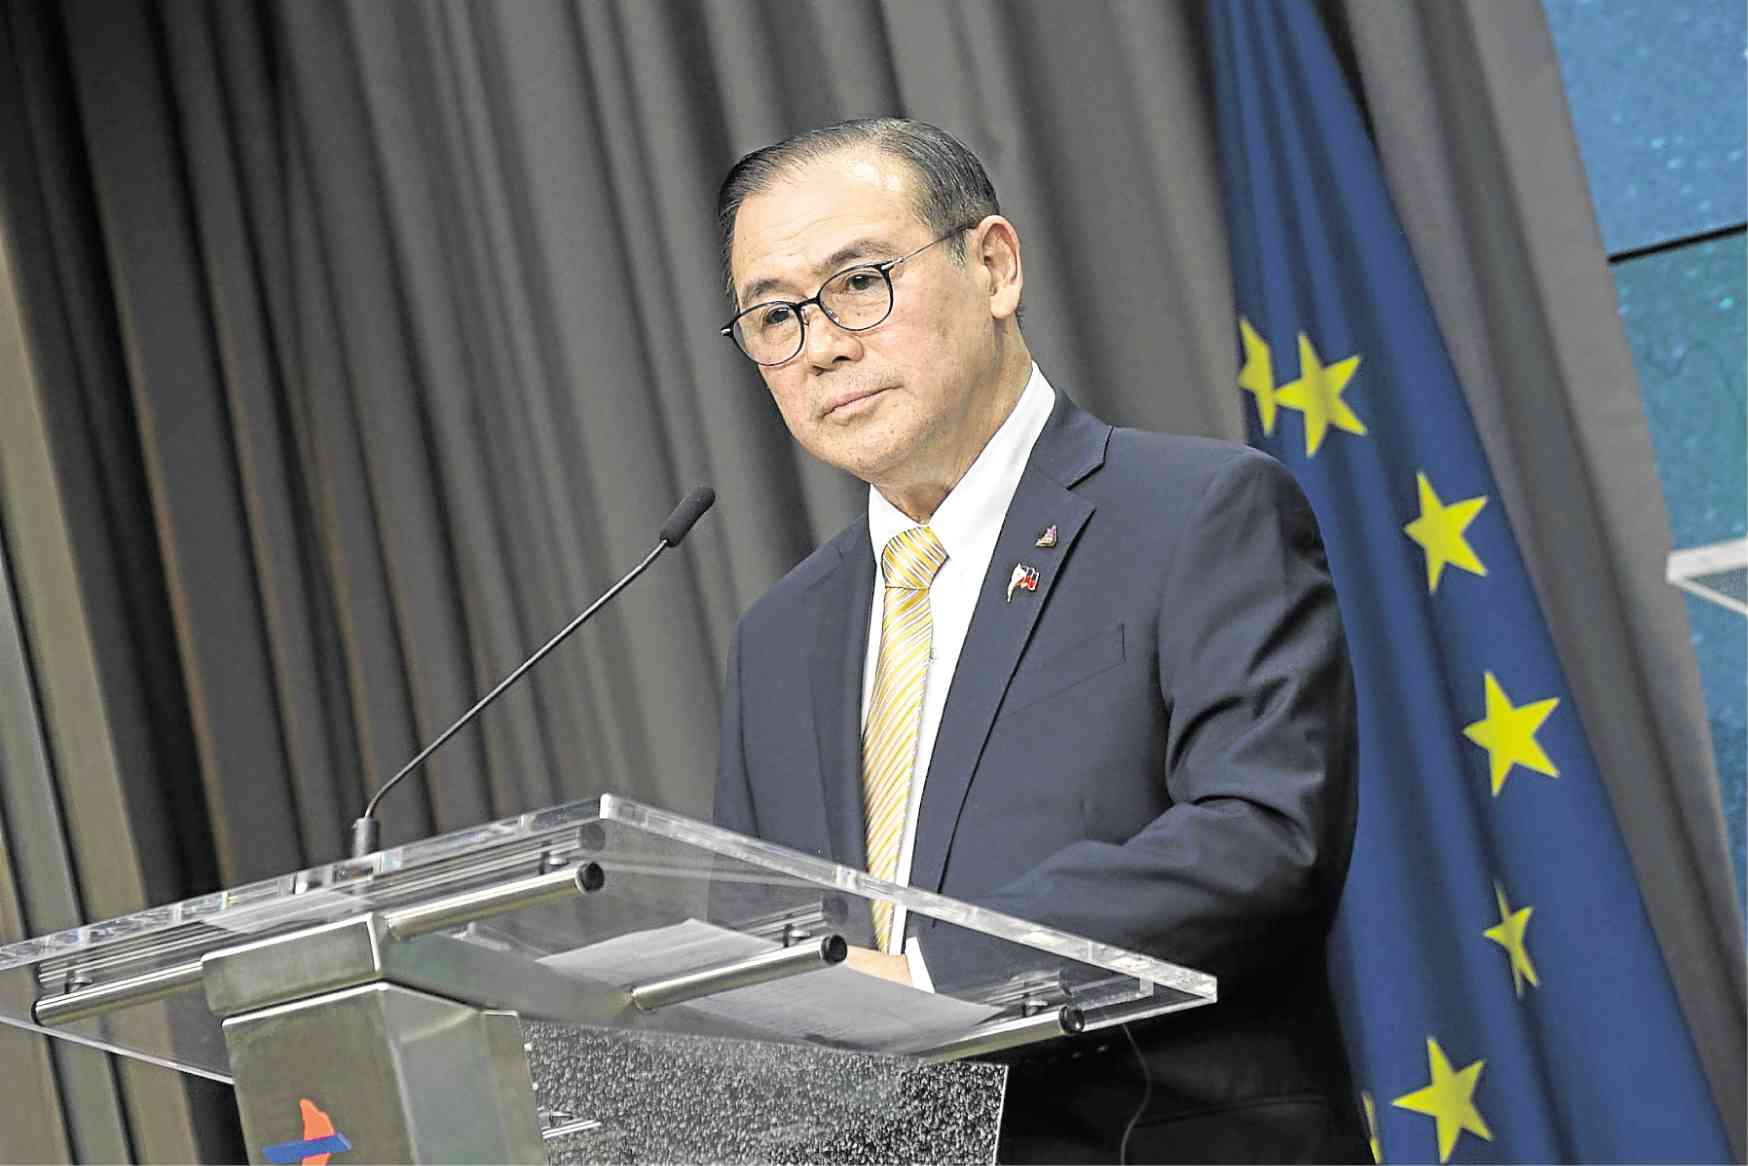 Locsin: It’s a free world, China can say anything it wants